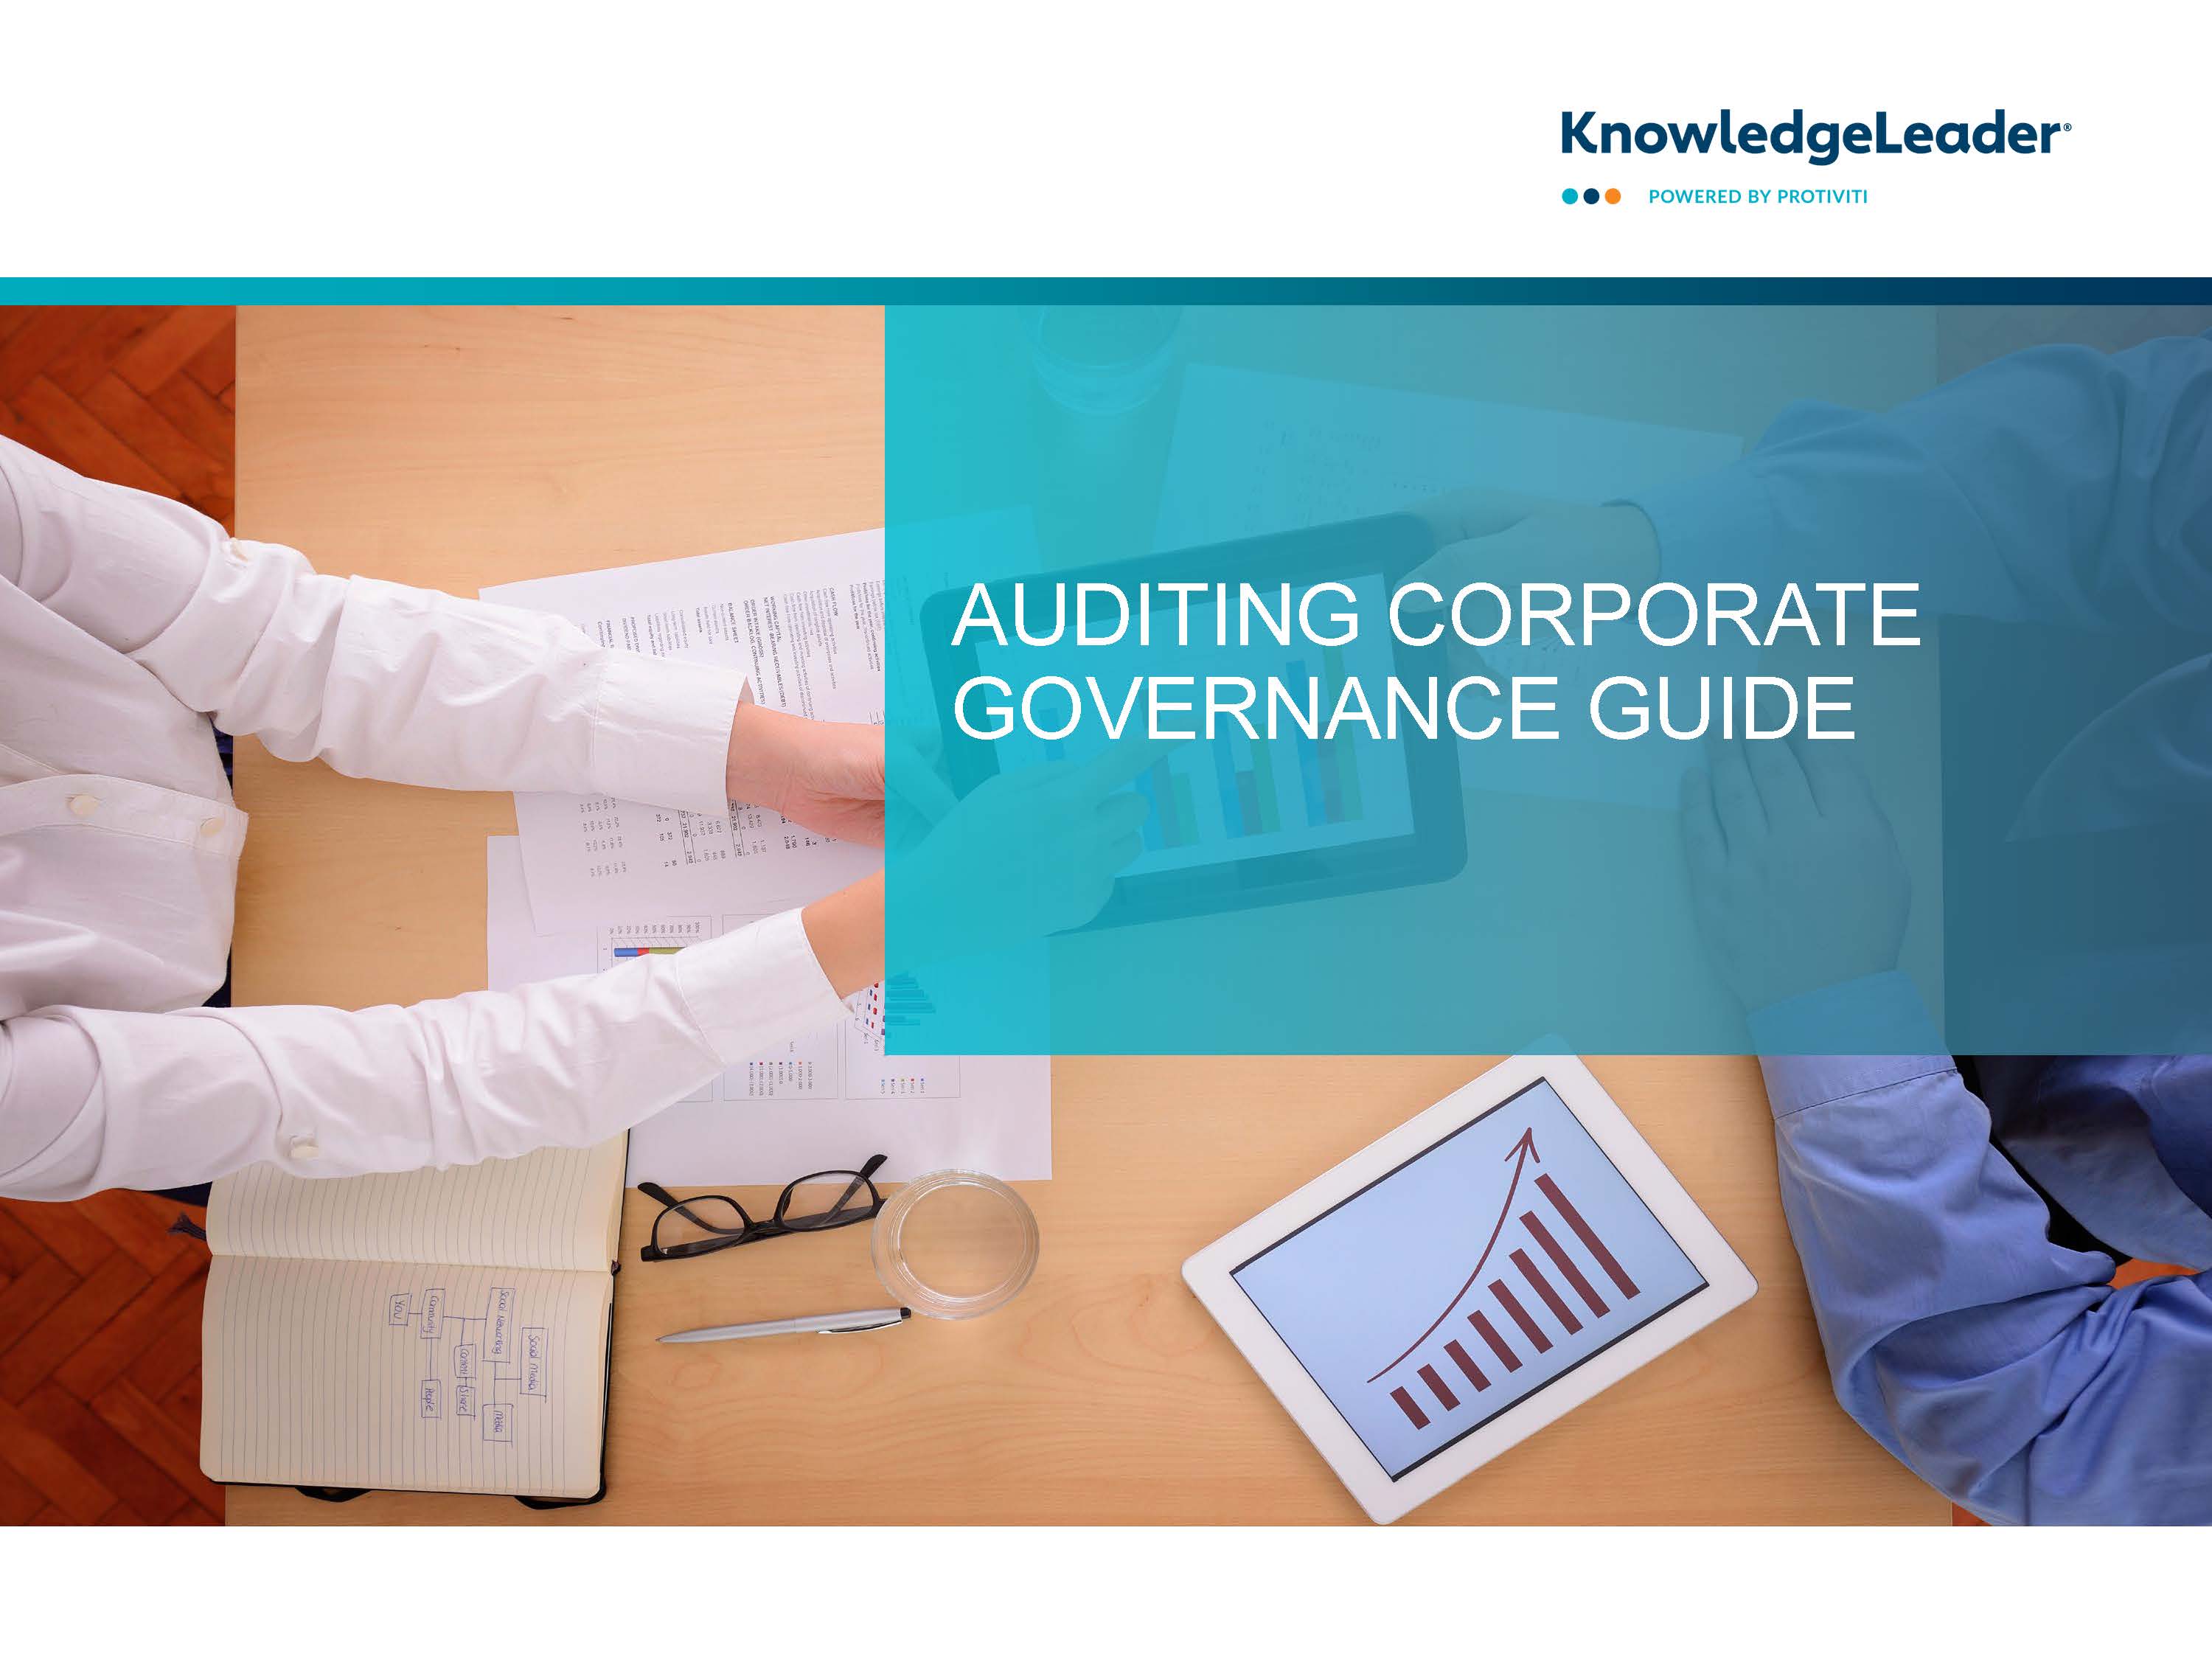 Screenshot of the first page of Auditing Corporate Governance Guide